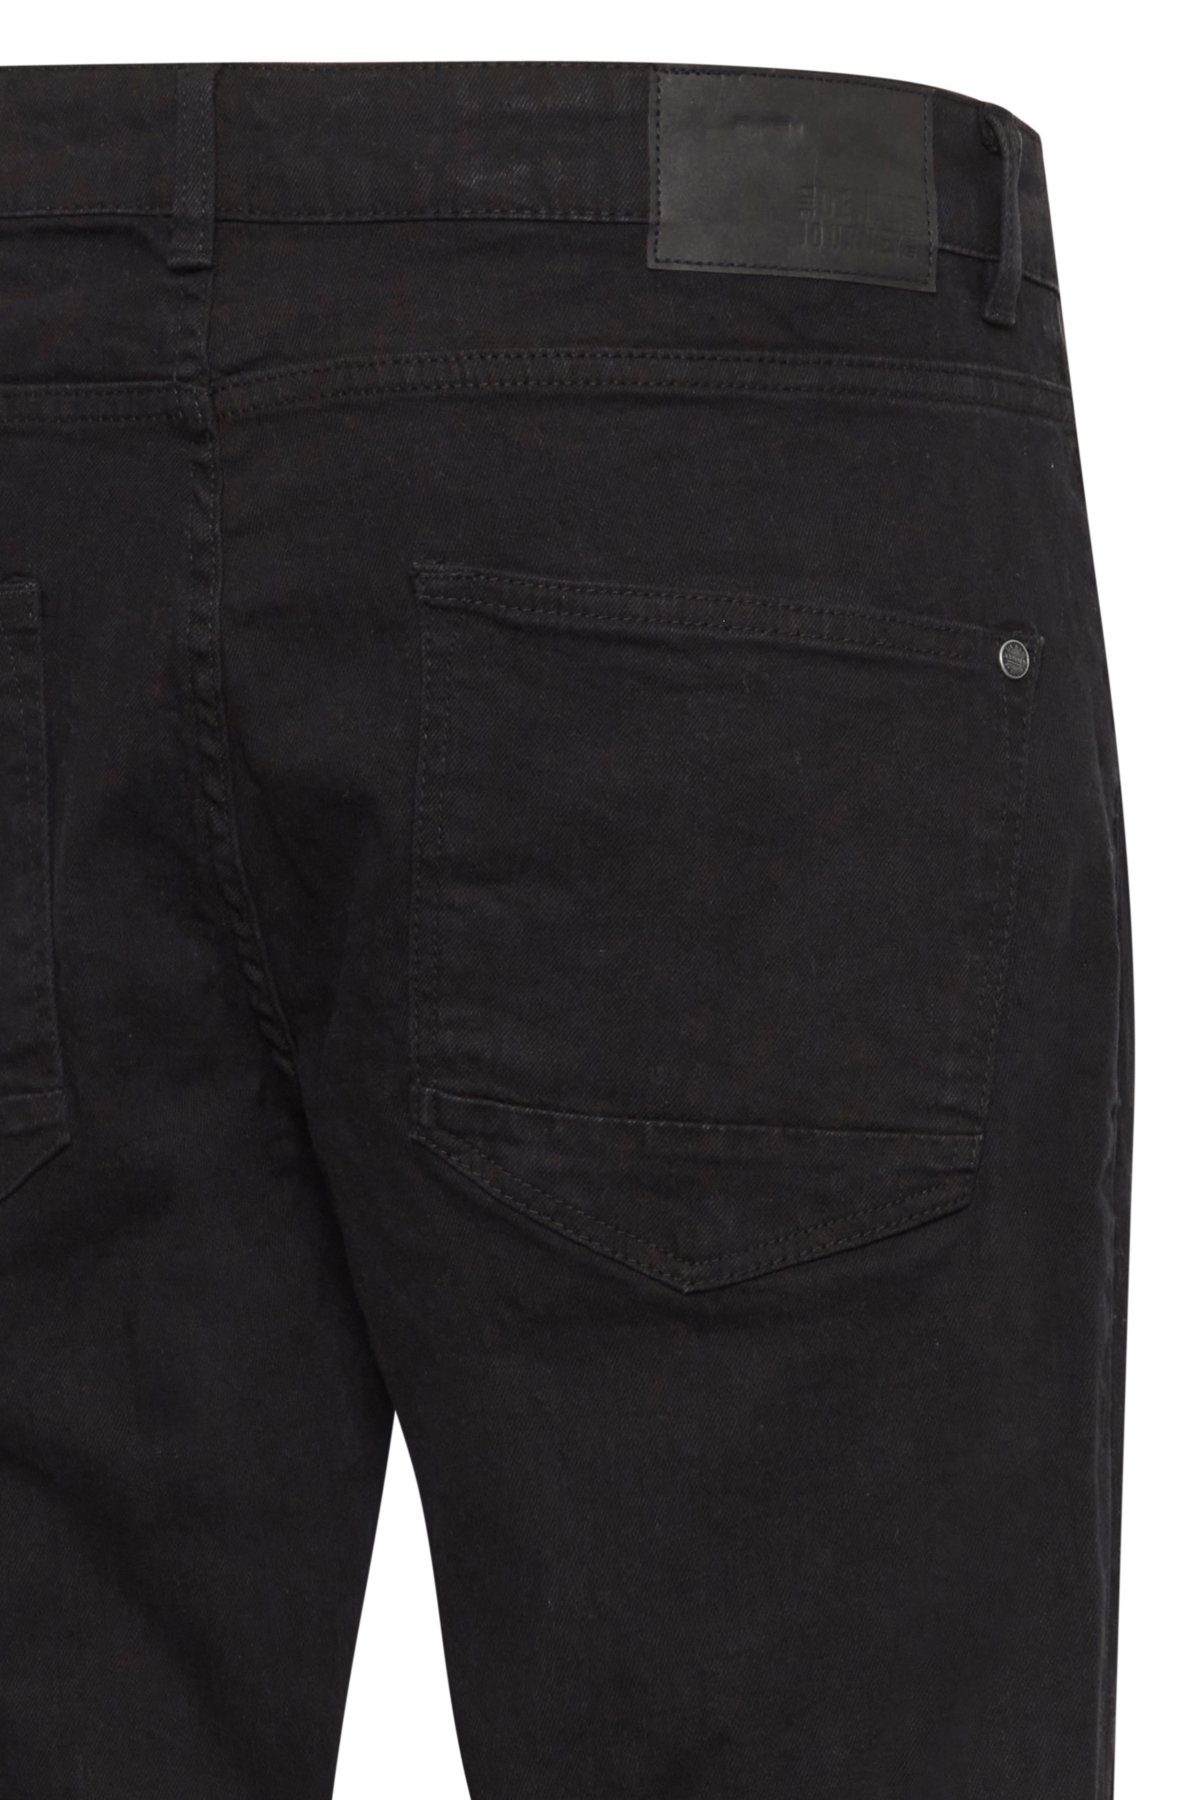 Straight-Jeans Black !SOLID 100 !Solid Jeans Ryder